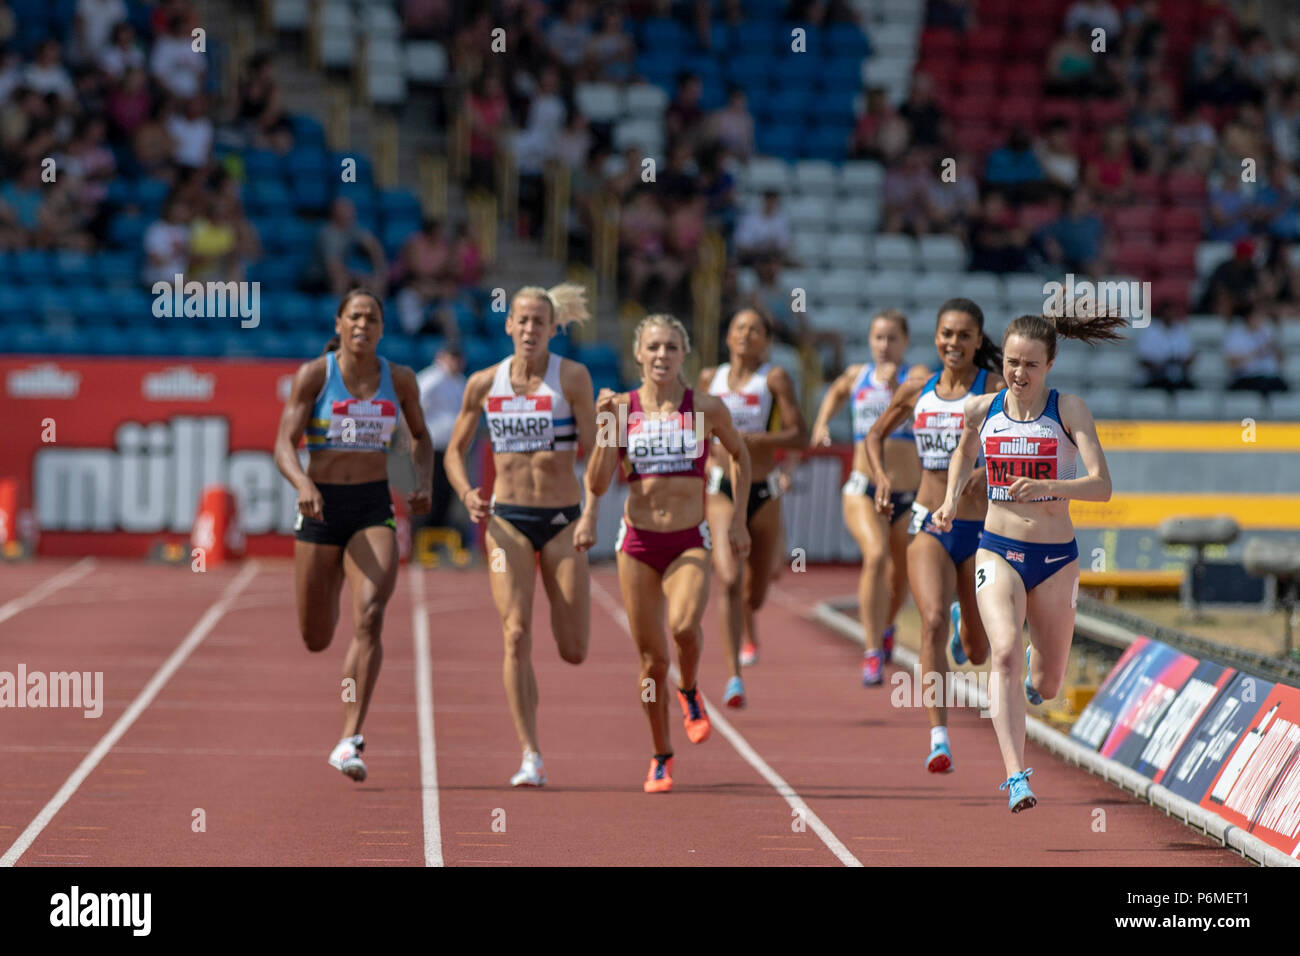 Birmingham, UK. 1st July, 2018. Laura Muir sprints to victory in the 800m final at the British Athletics Championships at Alexander Stadium, Birmingham, Great Britain, on 1 July 2018. Credit: Andrew Peat/Alamy Live News Stock Photo